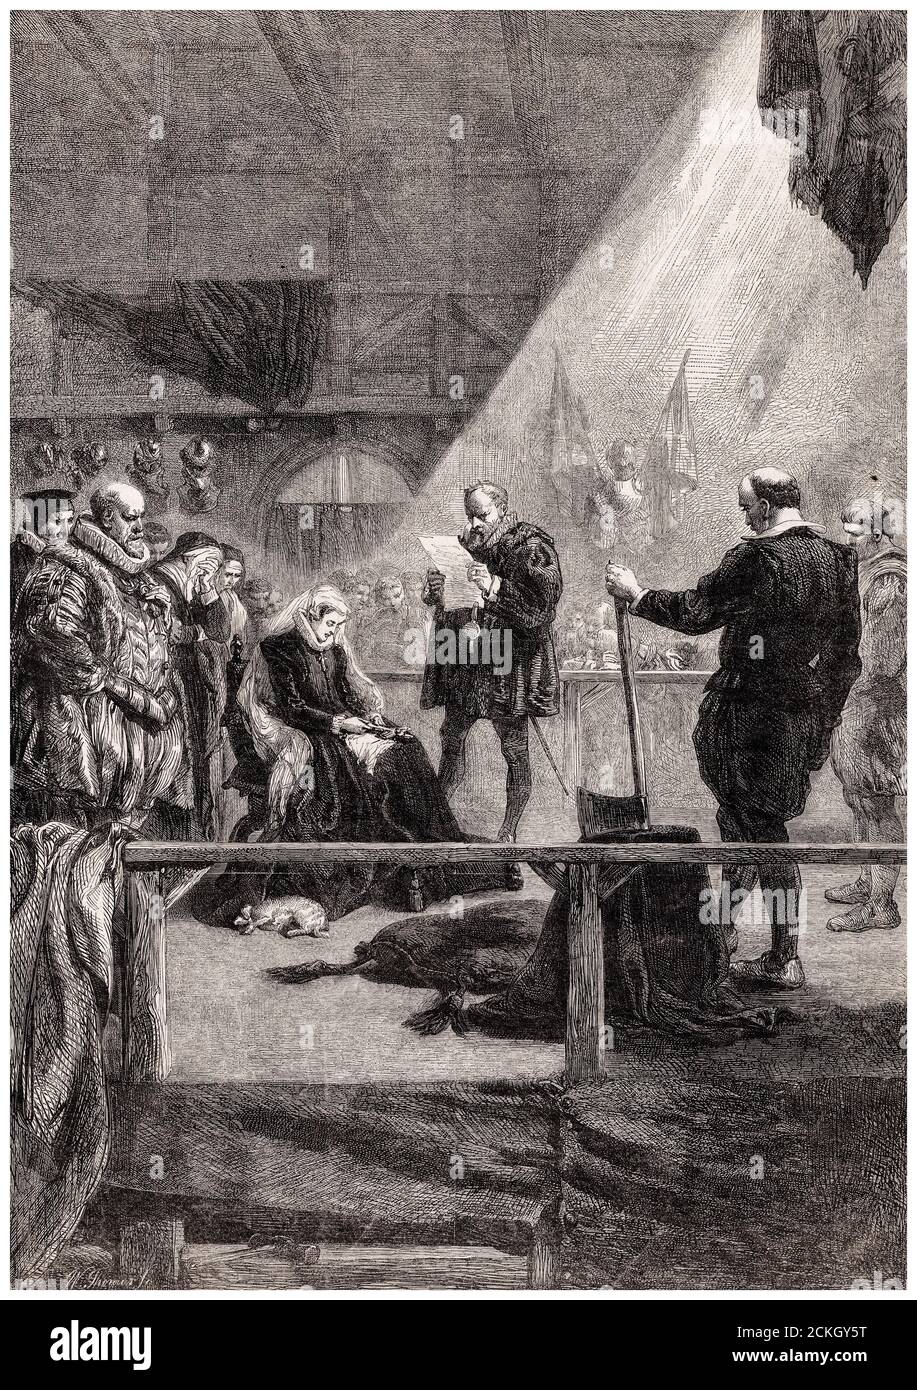 Execution of Mary Queen of Scots (1542-1587), on 8th February 1587 in the Great Hall at Fotheringhay Castle, Northamptonshire, England, engraving by William Luson Thomas after Sir John Gilbert, 1861 Stock Photo